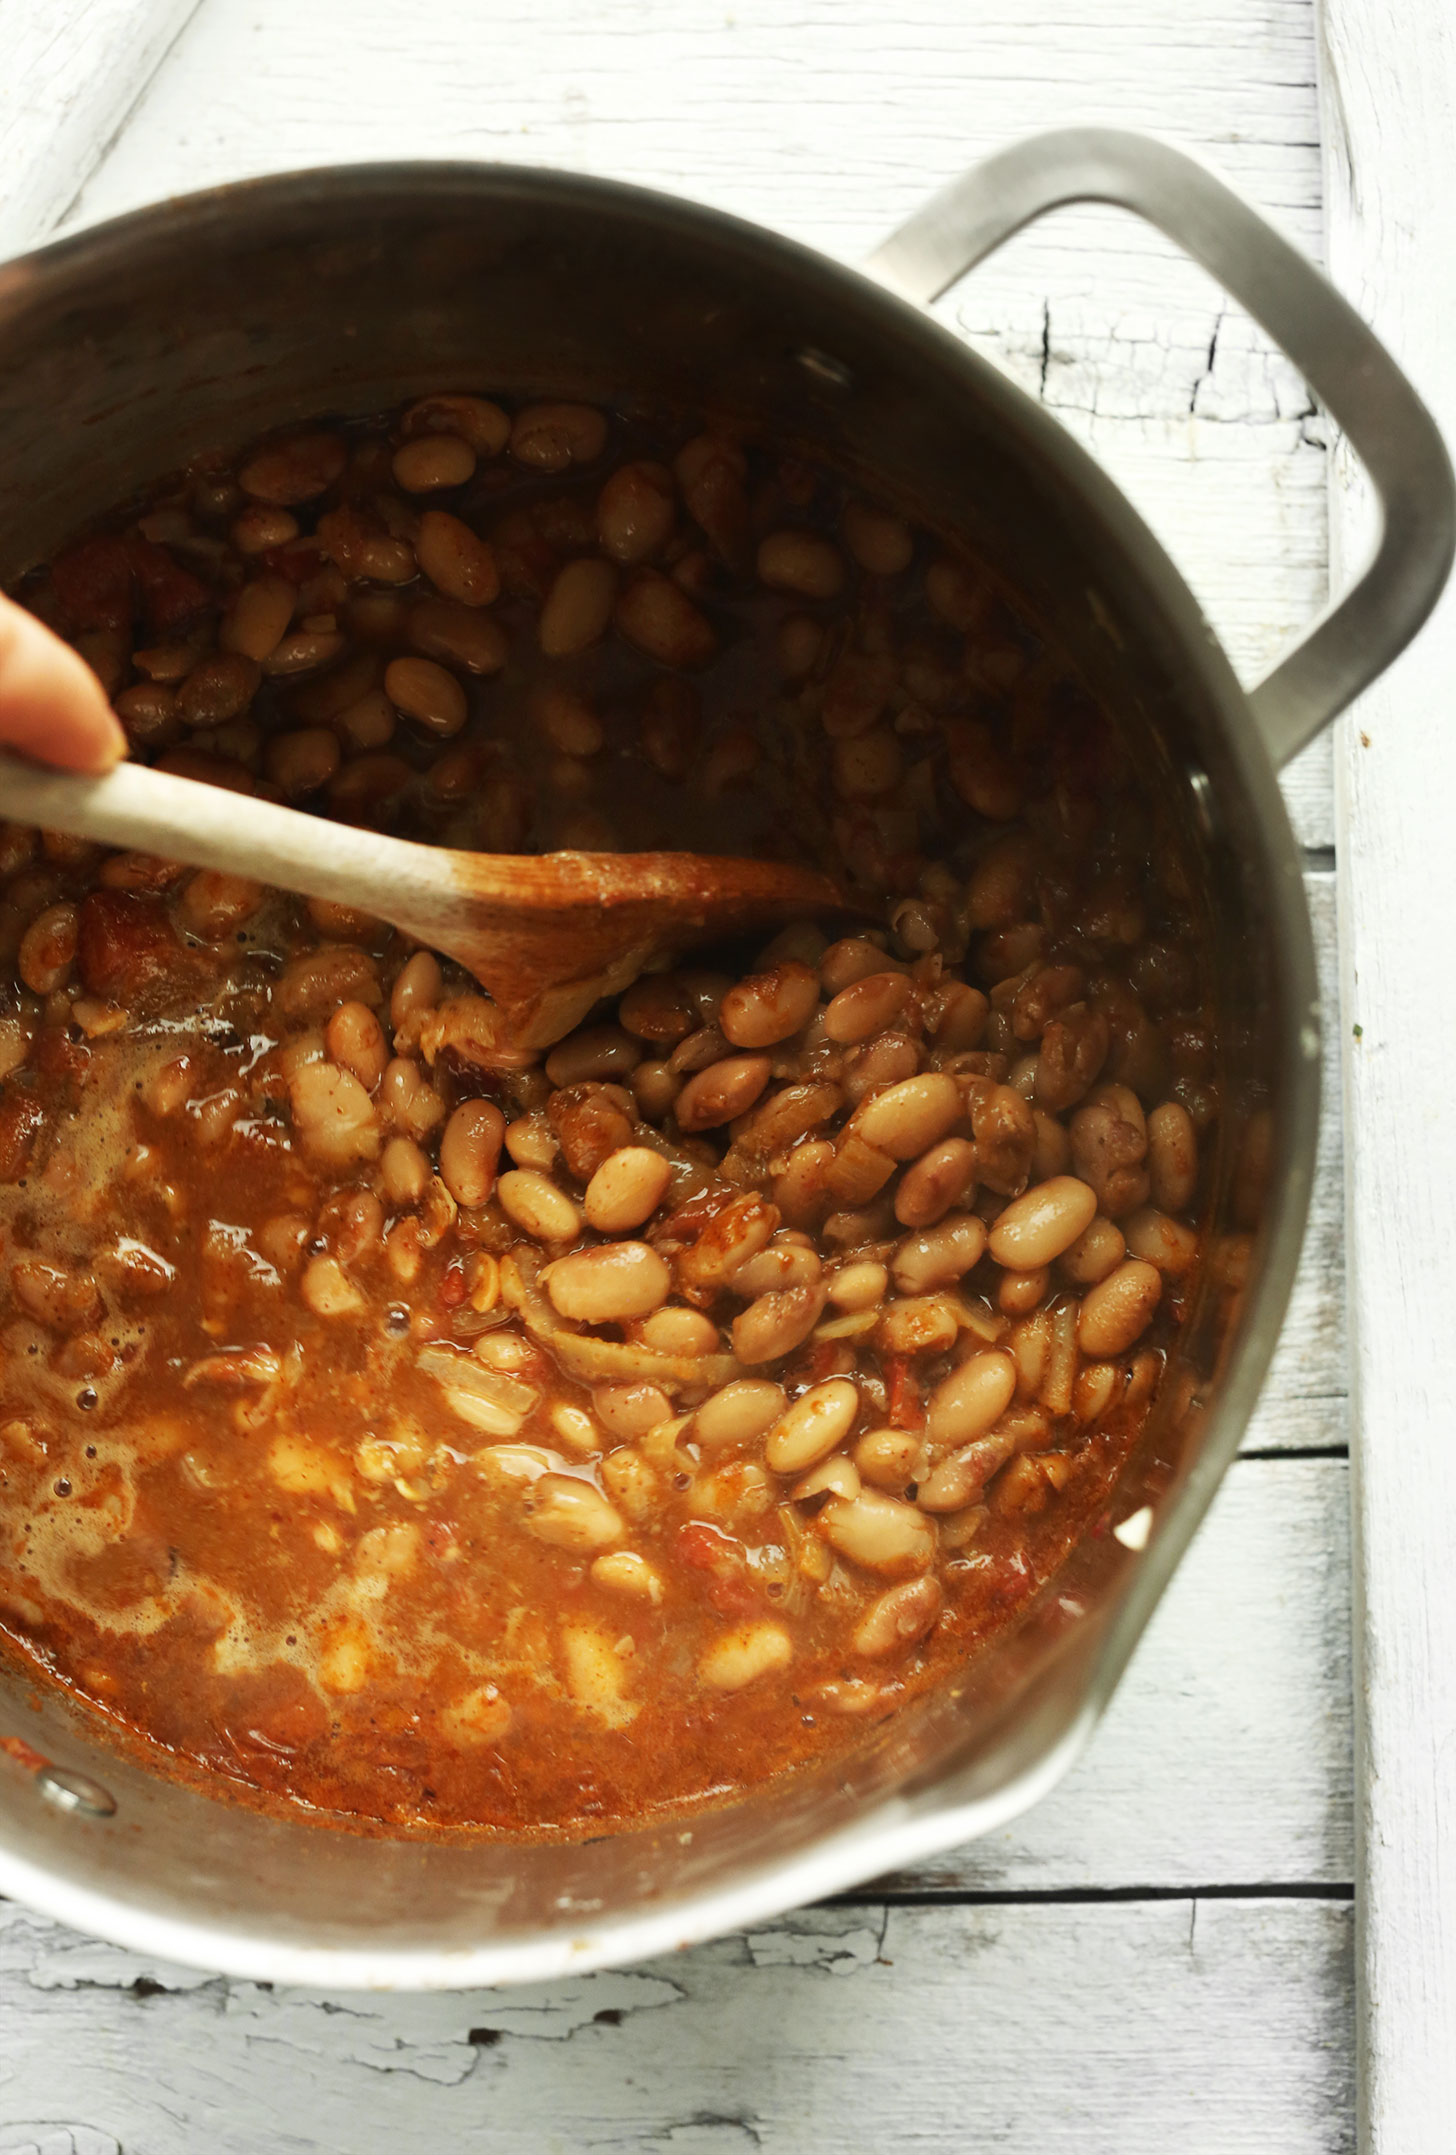 Stirring a big pot of beans made with our How to Cook Pinto Beans made from Scratch recipe